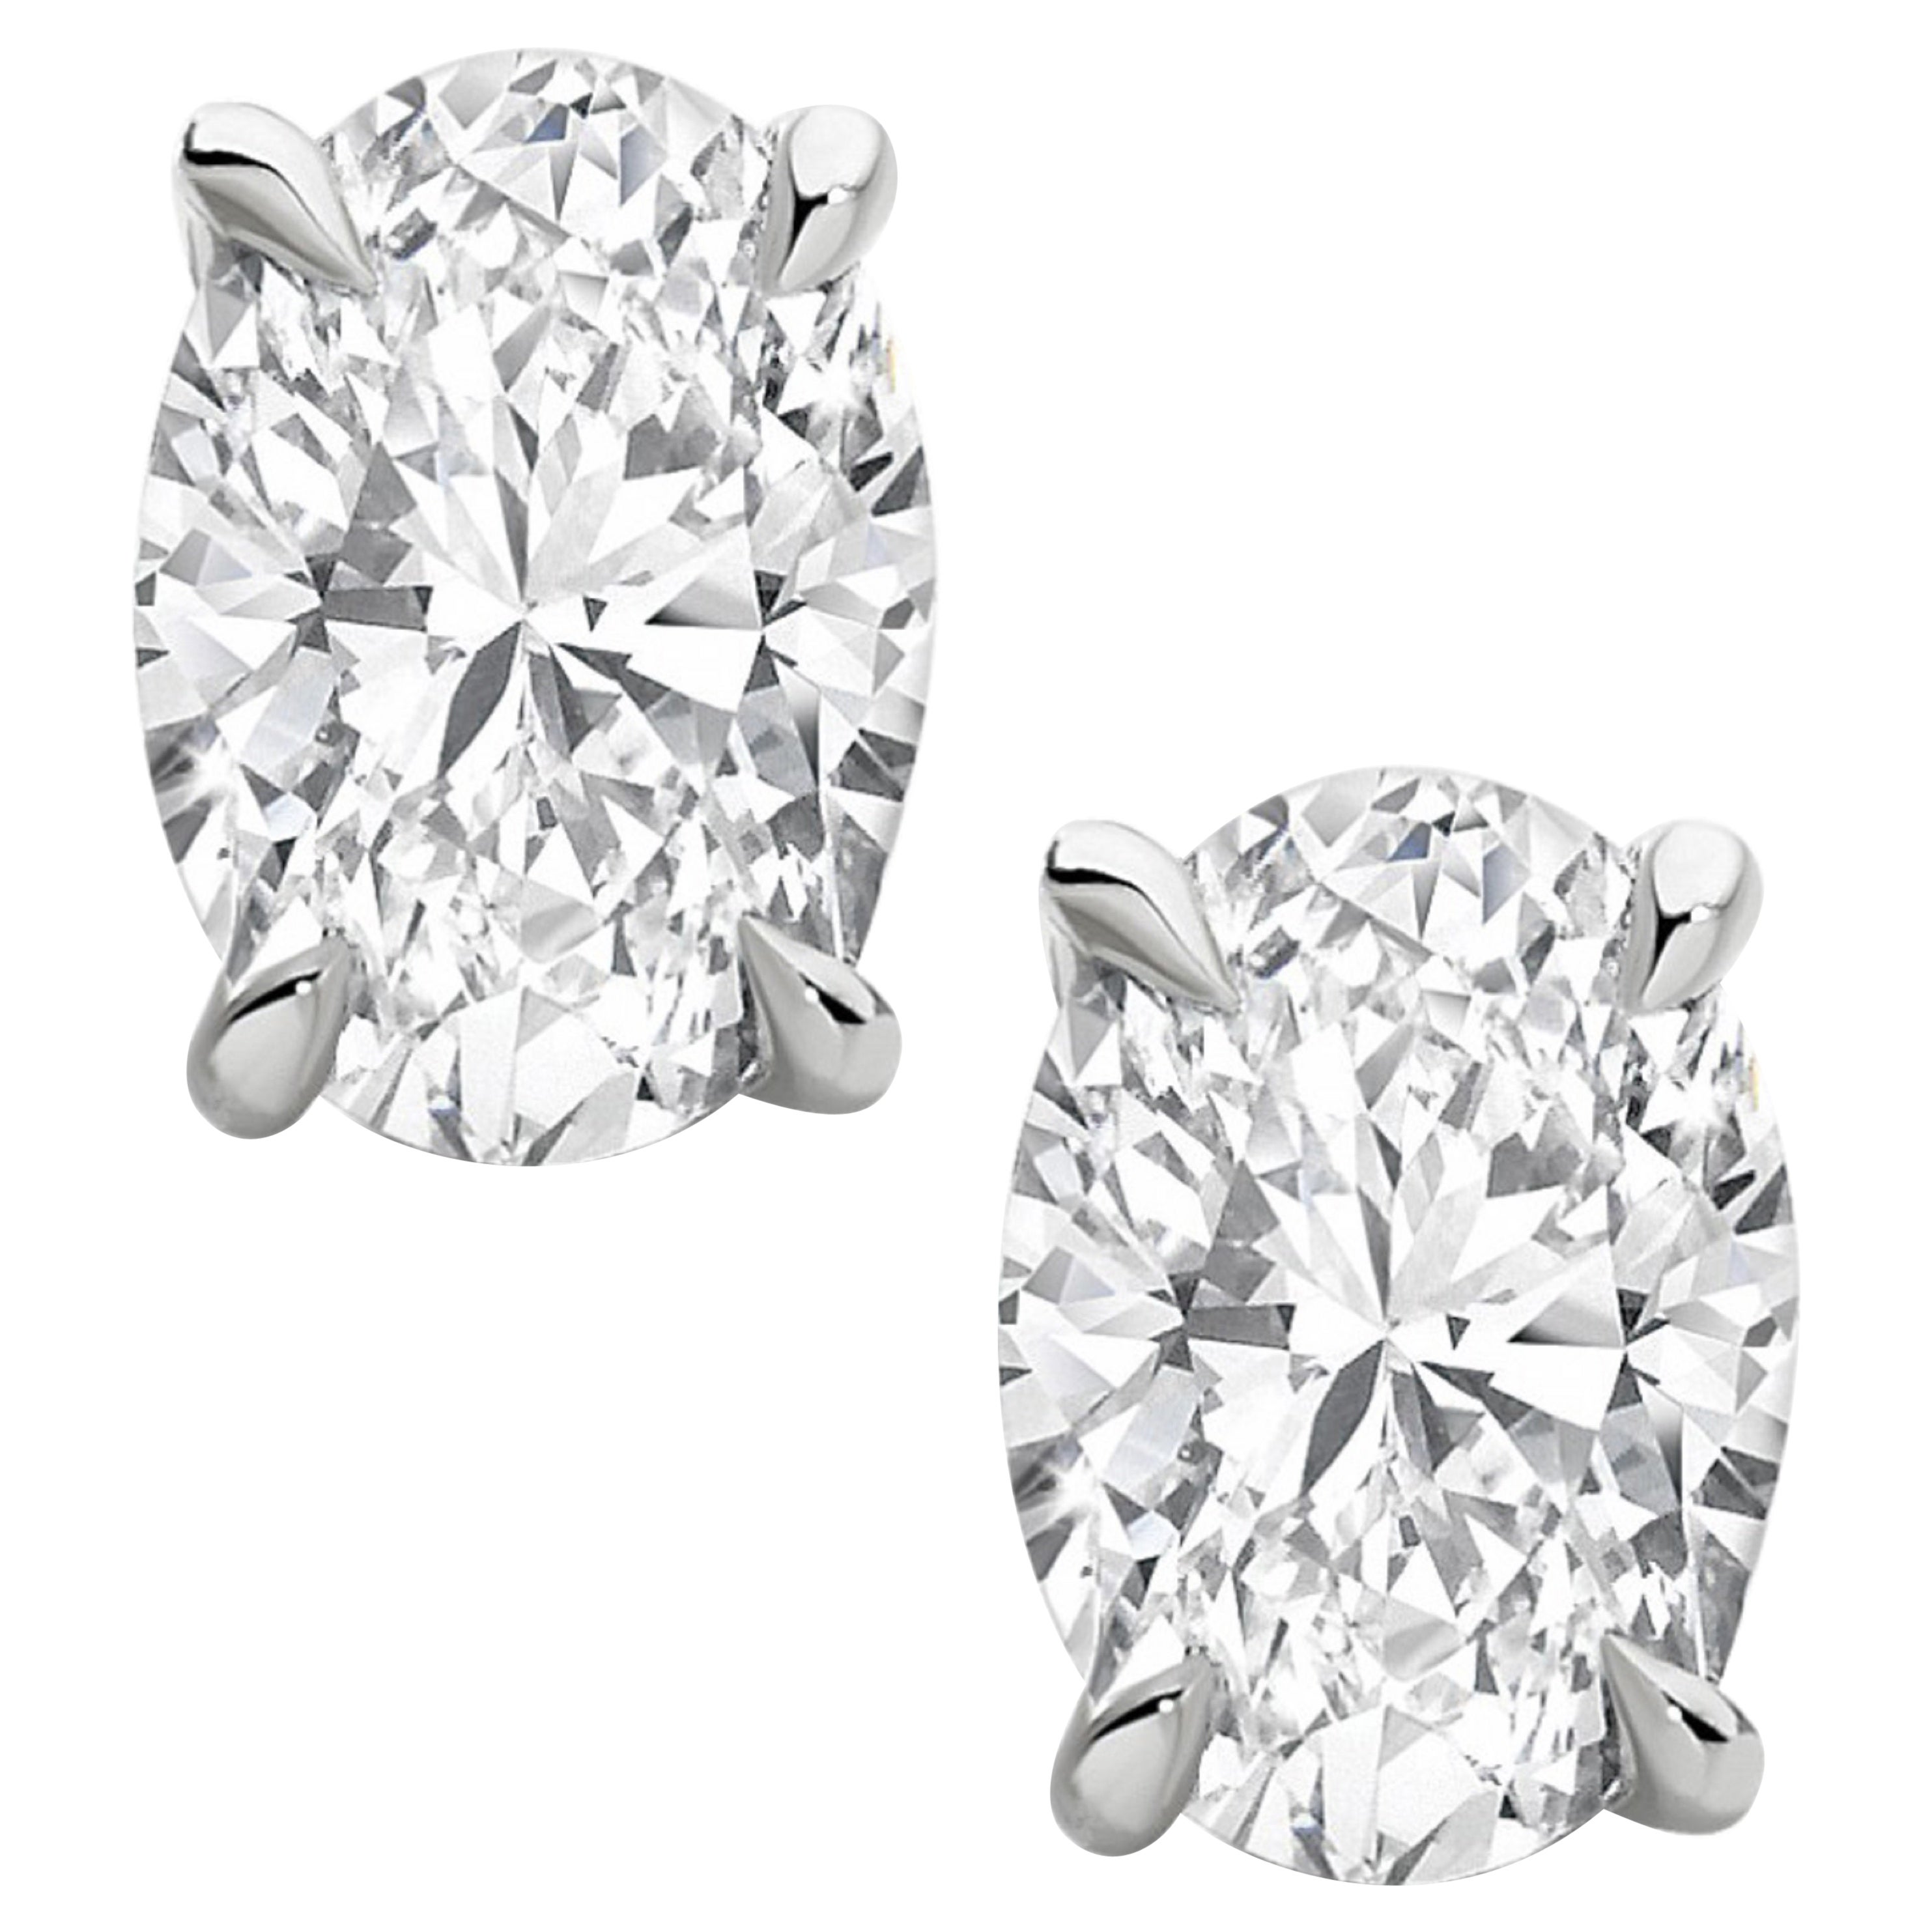 Exceptional Type 2A Flawless GIA Certified 4.00 Carat Oval Cut Diamond Studs